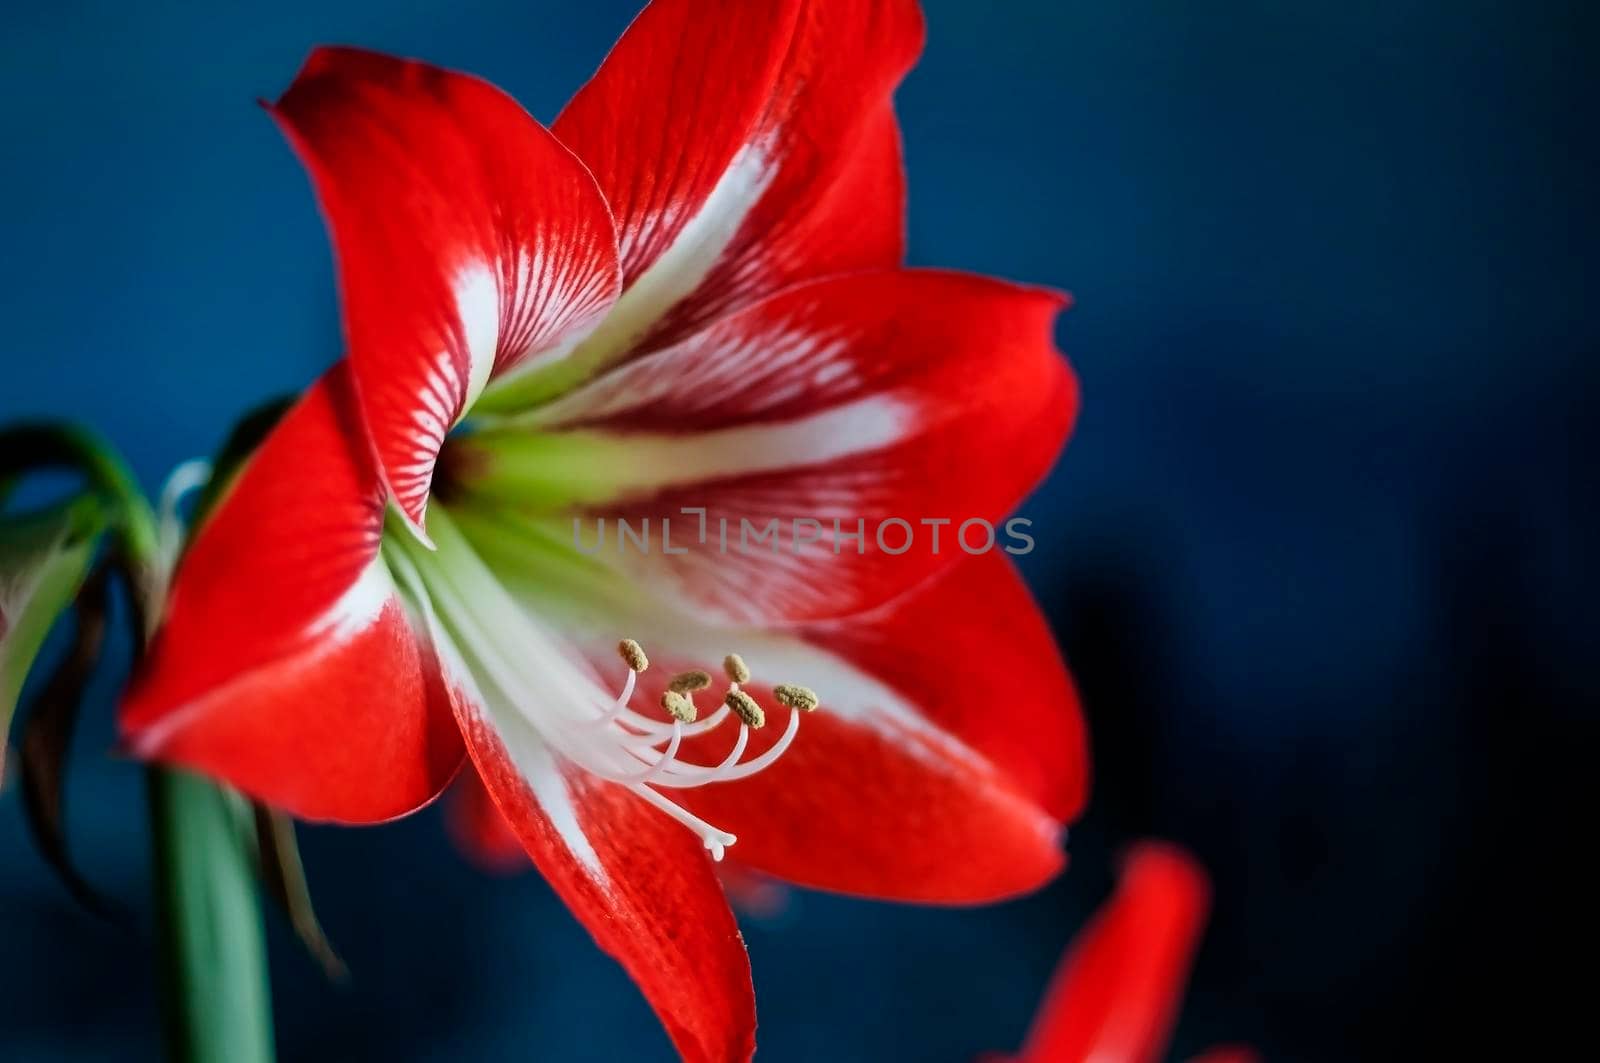 red flower with Latin name Hippeastrum blooms on the windowsill